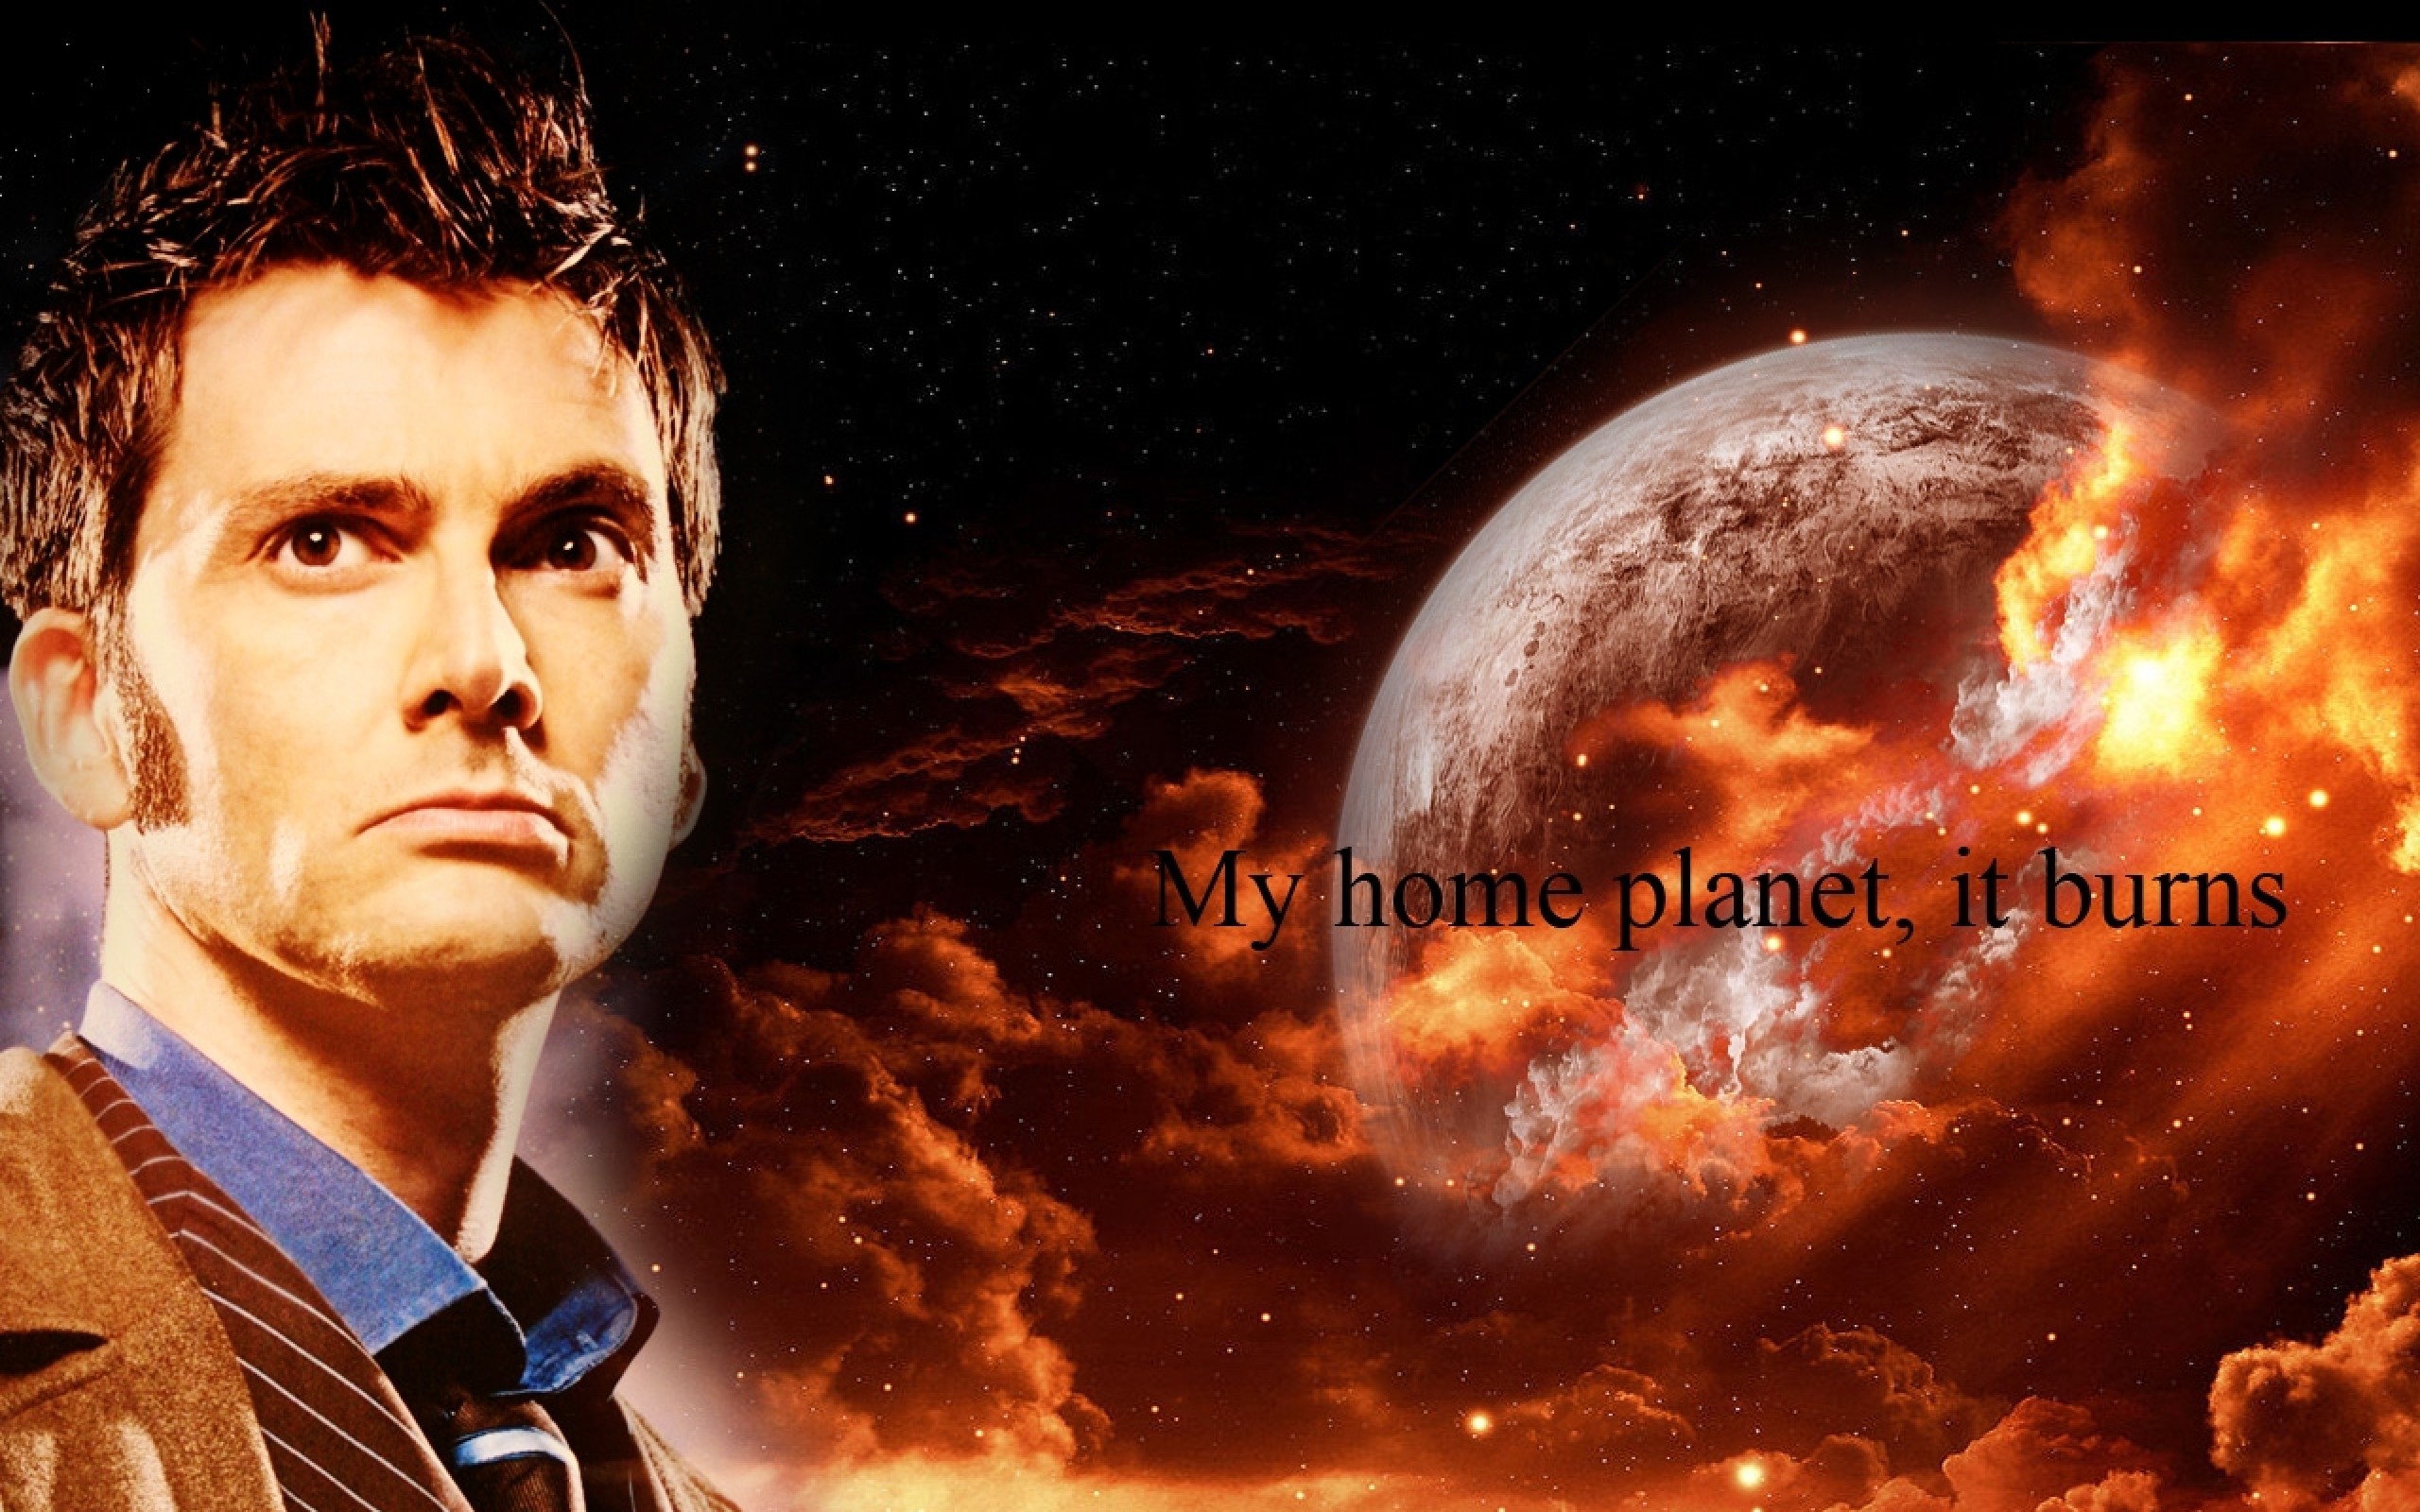 General 2560x1600 Doctor Who The Doctor TARDIS David Tennant gallifrey Tenth Doctor planet quote science fiction TV series